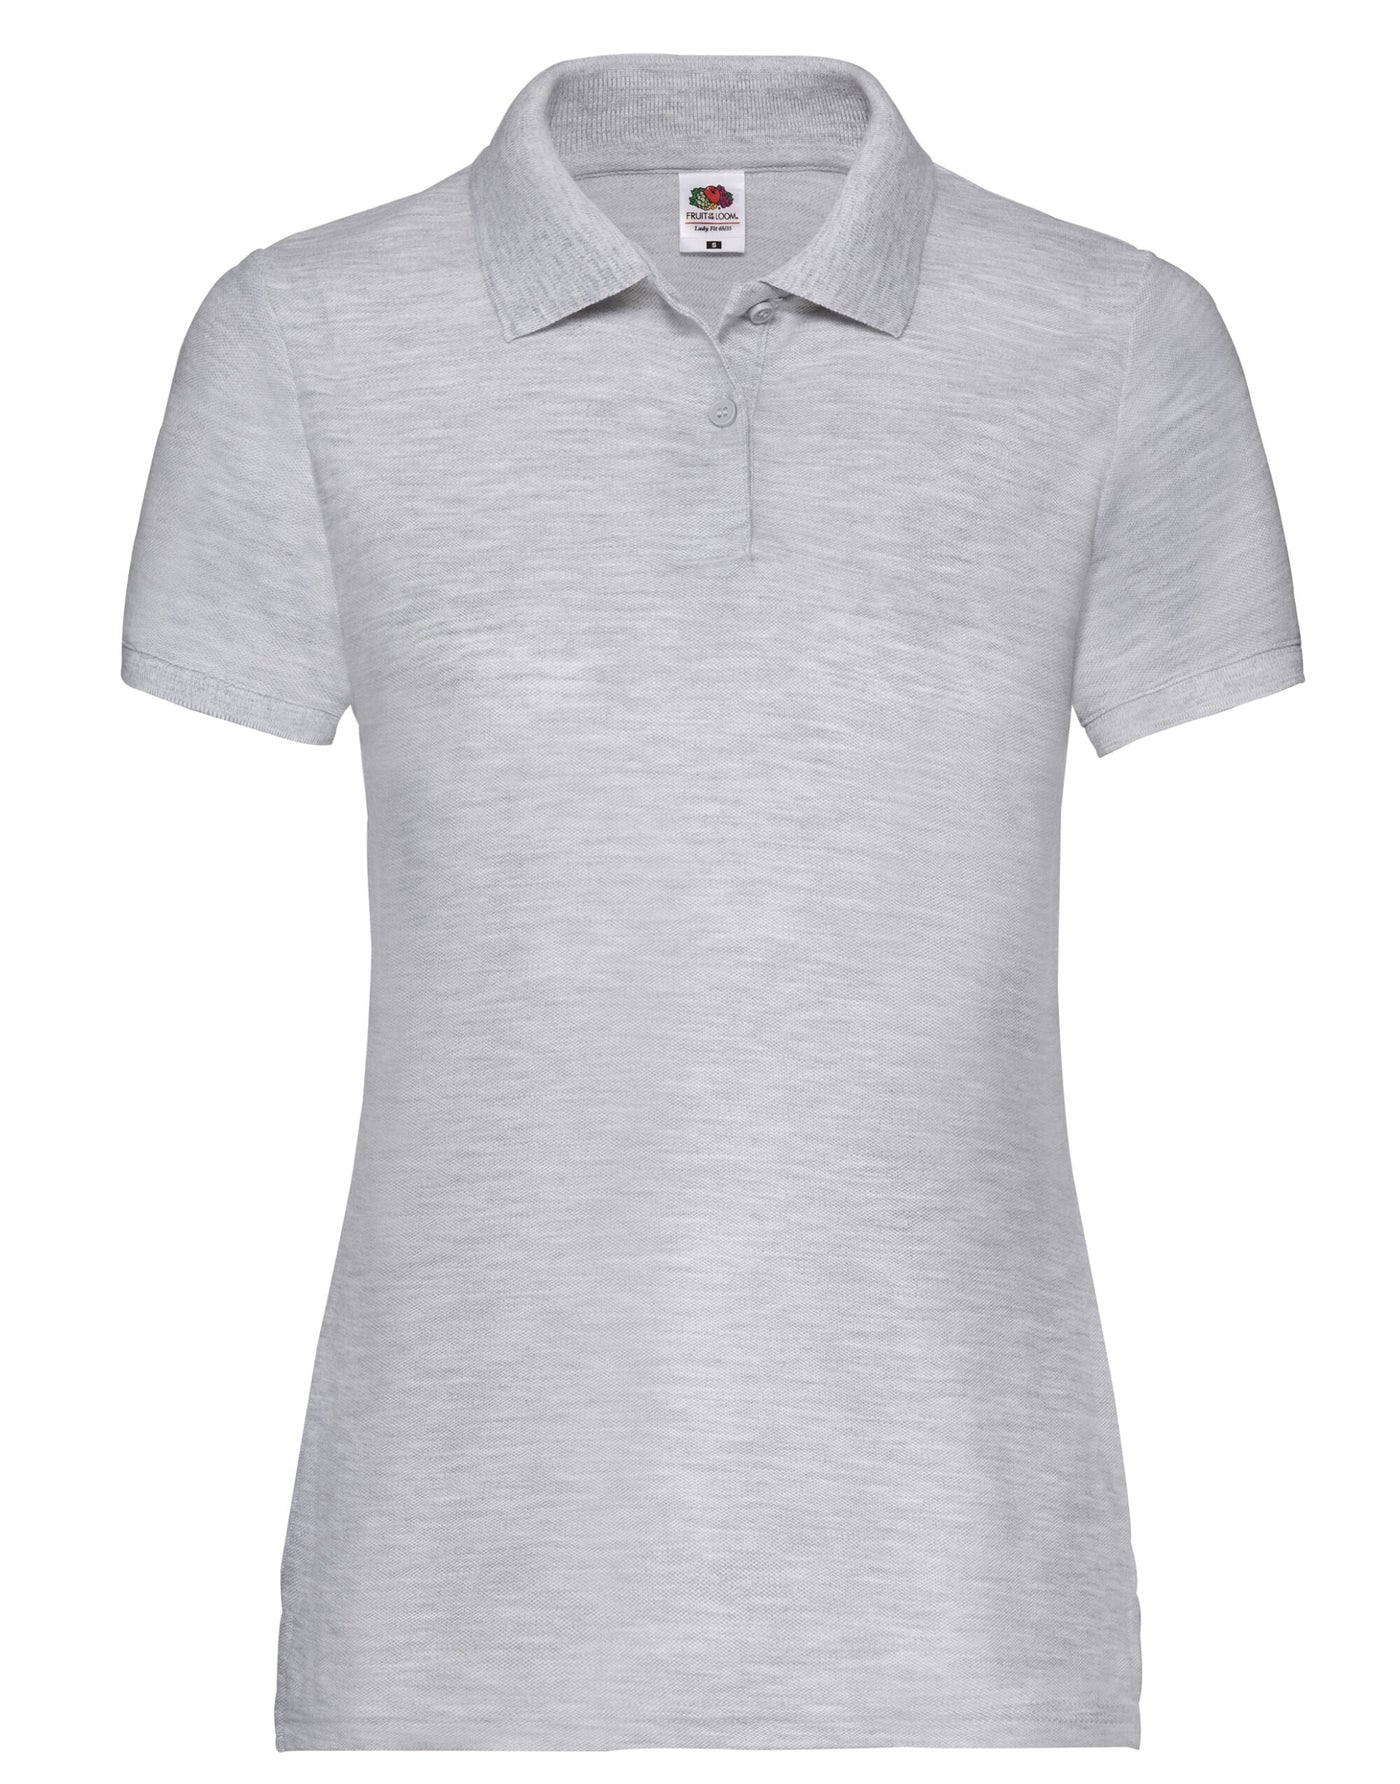 Ladies Fit Polo Shirt In Heather Grey